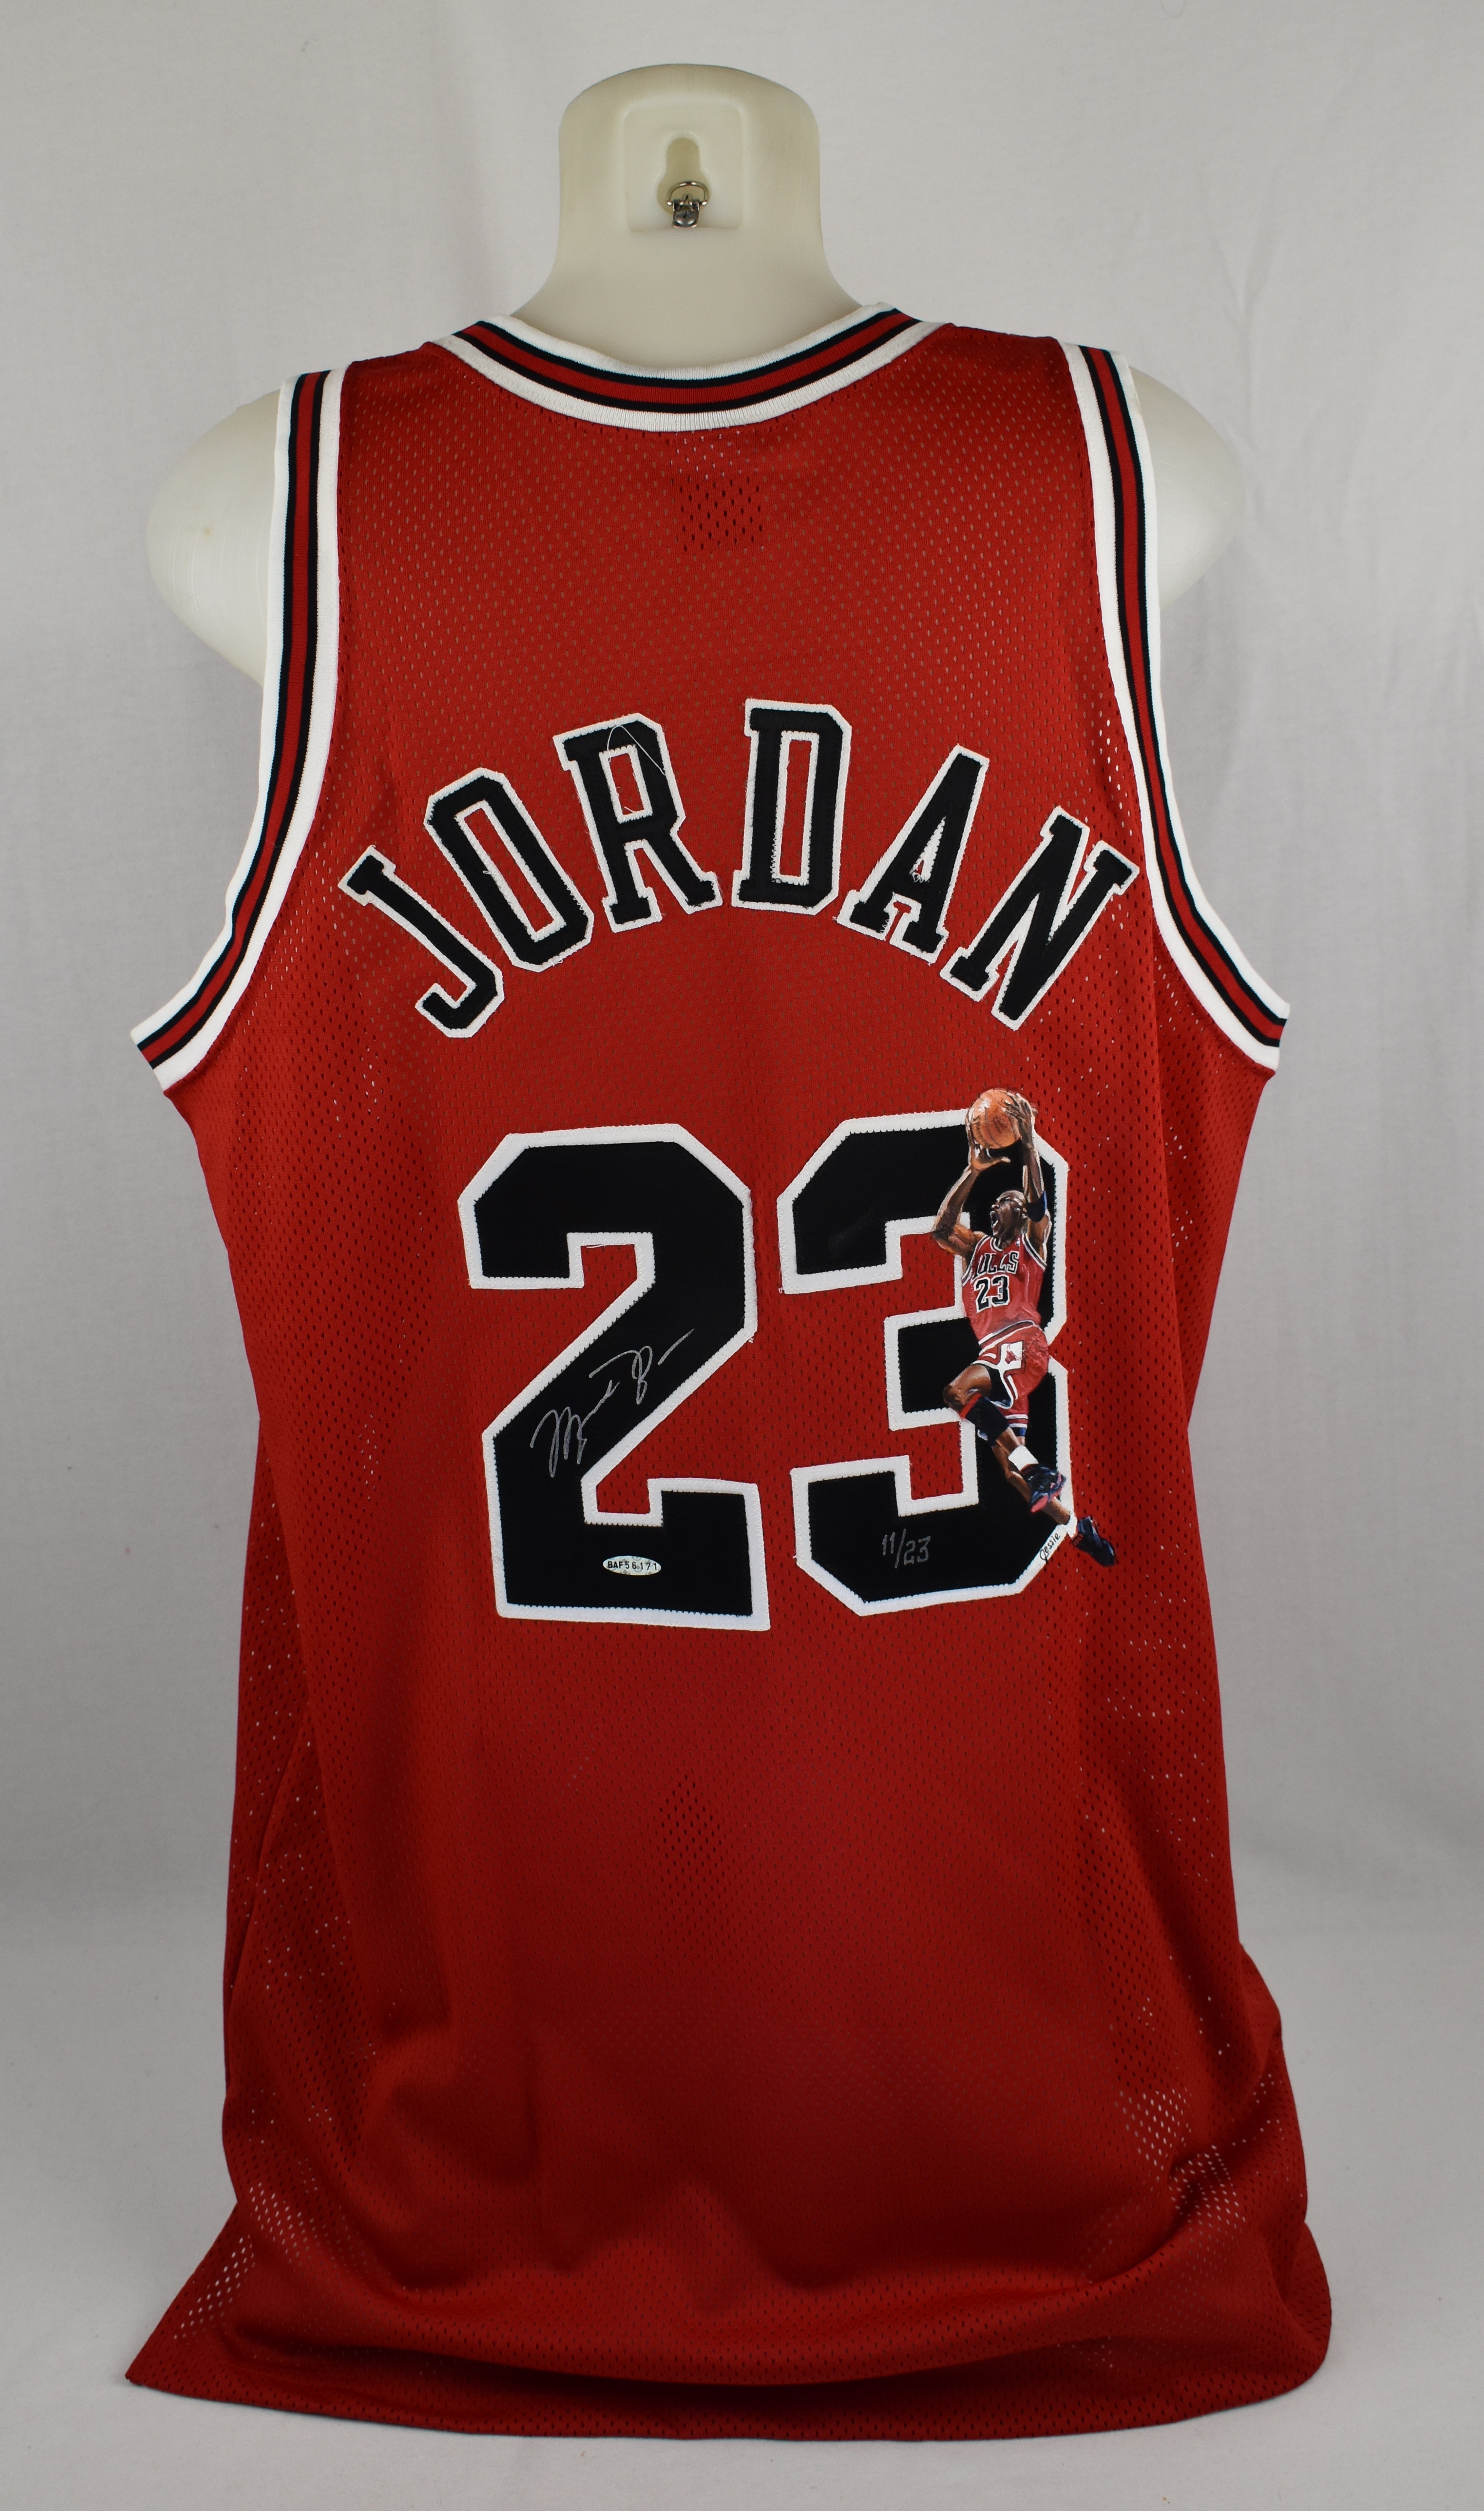 Complex Coöperatie Onbepaald Lot Detail - Michael Jordan Autographed Limited Edition Painted Road Red  Jersey #11/23 UDA